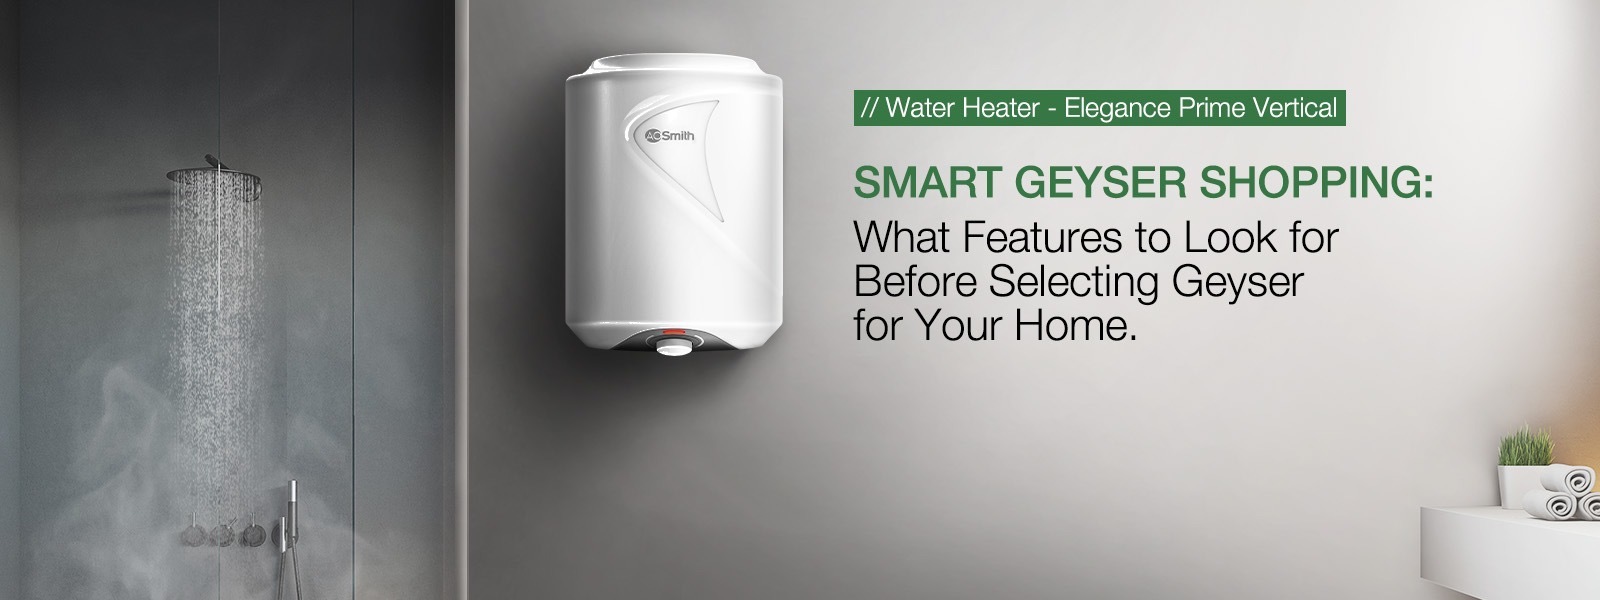 Smart Geyser Shopping: What Features to Look for Before Selecting Geyser for Your Home.